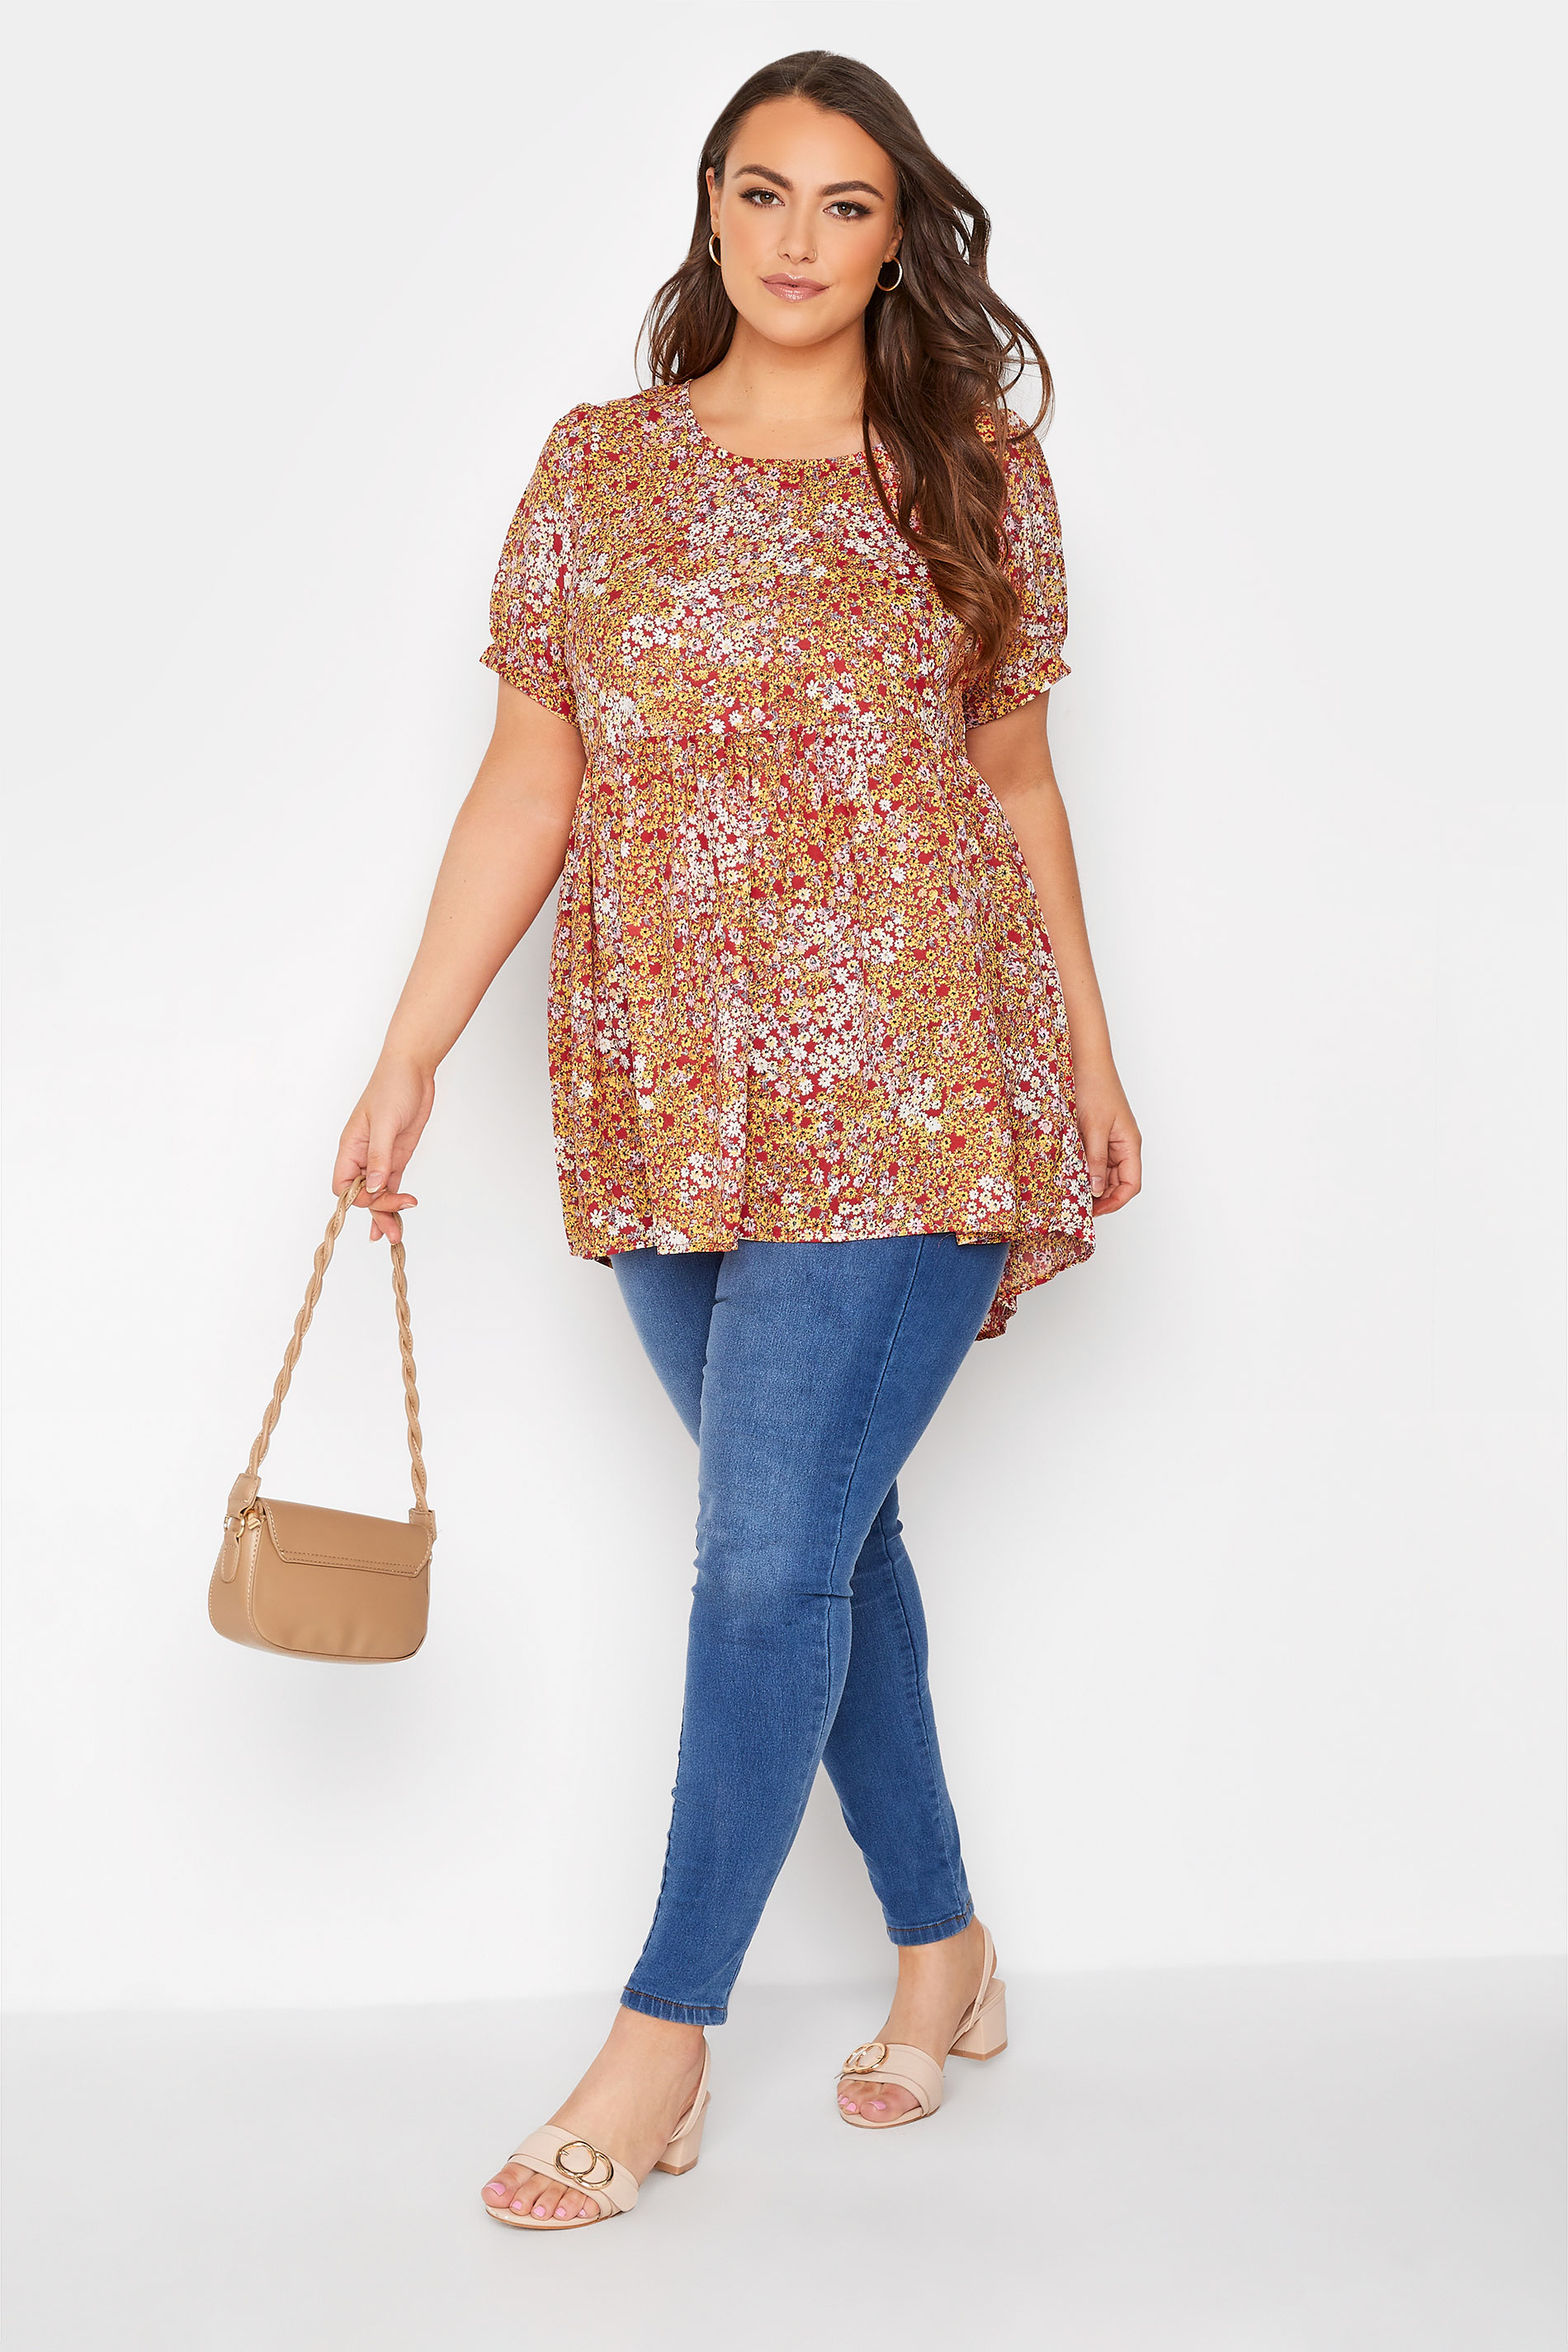 Grande taille  Tops Grande taille  Tops Jersey | Top Orange Imprimé Floral Manches Bouffantes - YM17962